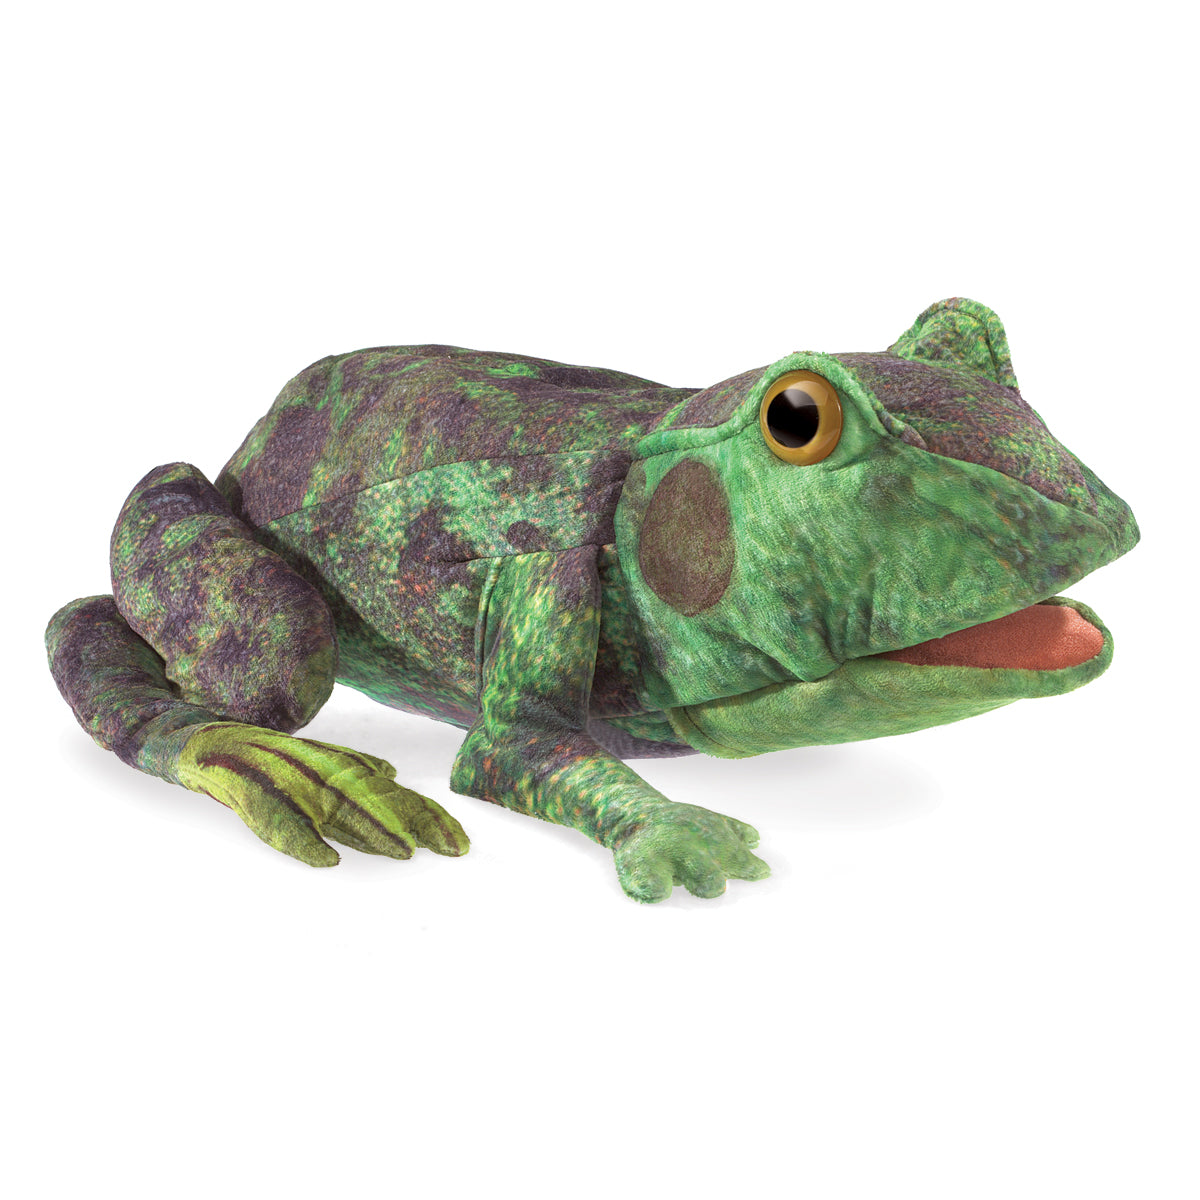 Educational Soft Puppet - FROG LIFE-CYCLE Hand Puppet (Large)